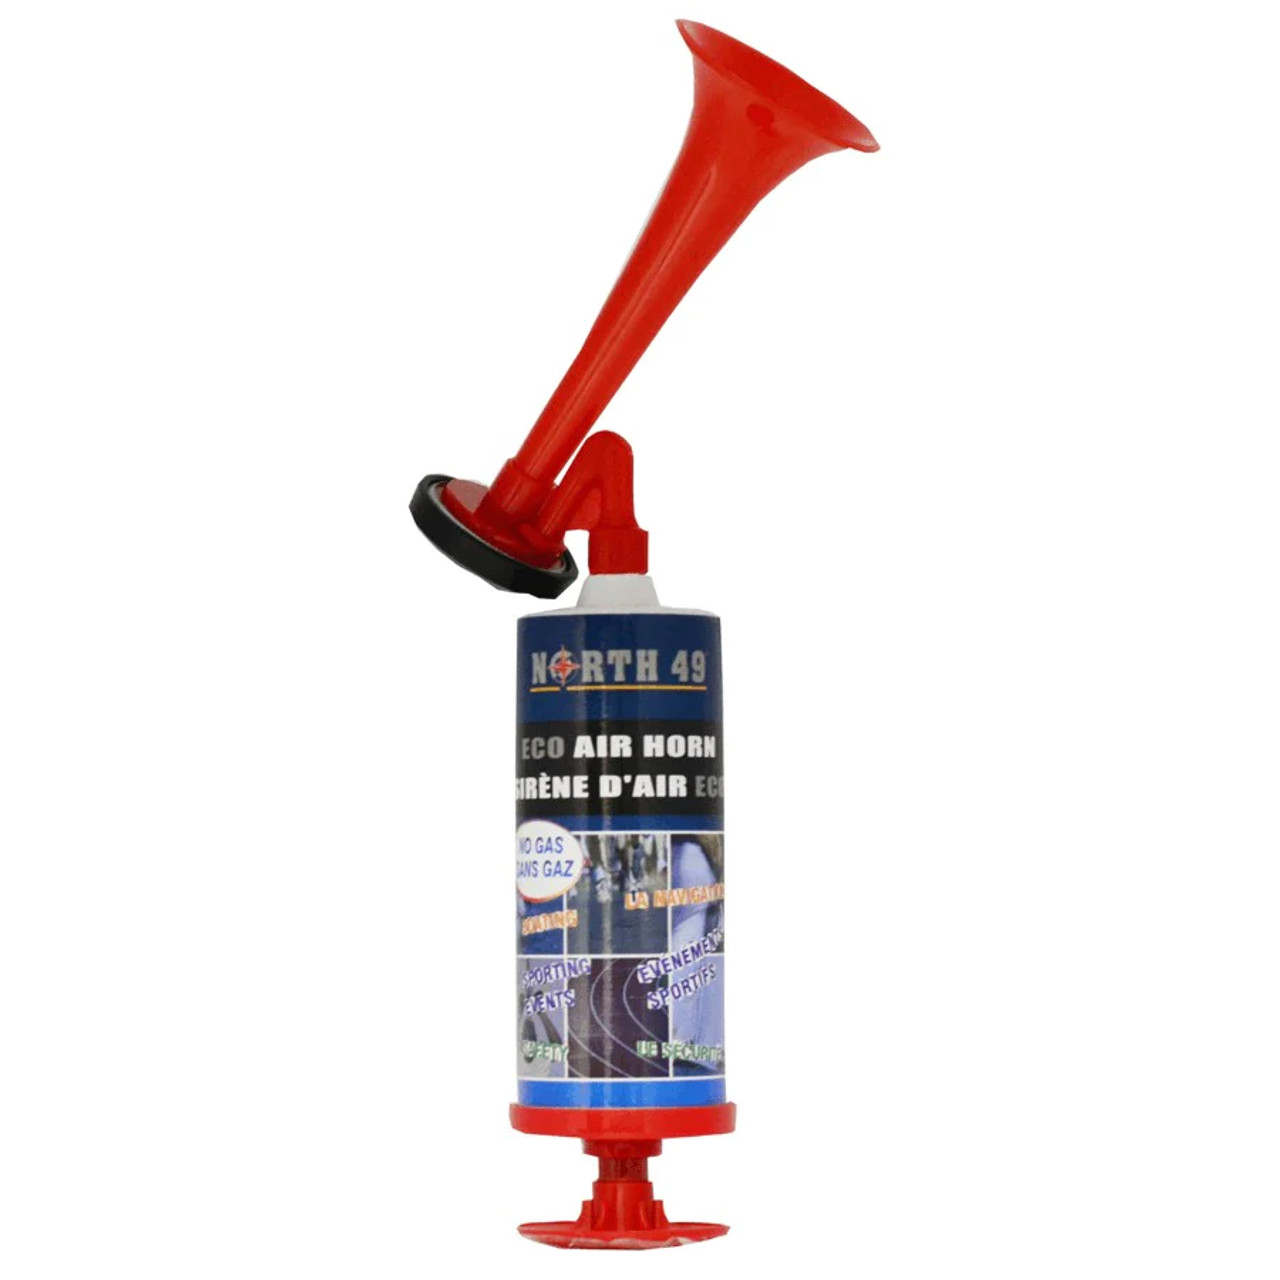 North 49 Pump Eco Air Horn Pump Style Air Horn, Water Resistant. No Disposable Containers Large